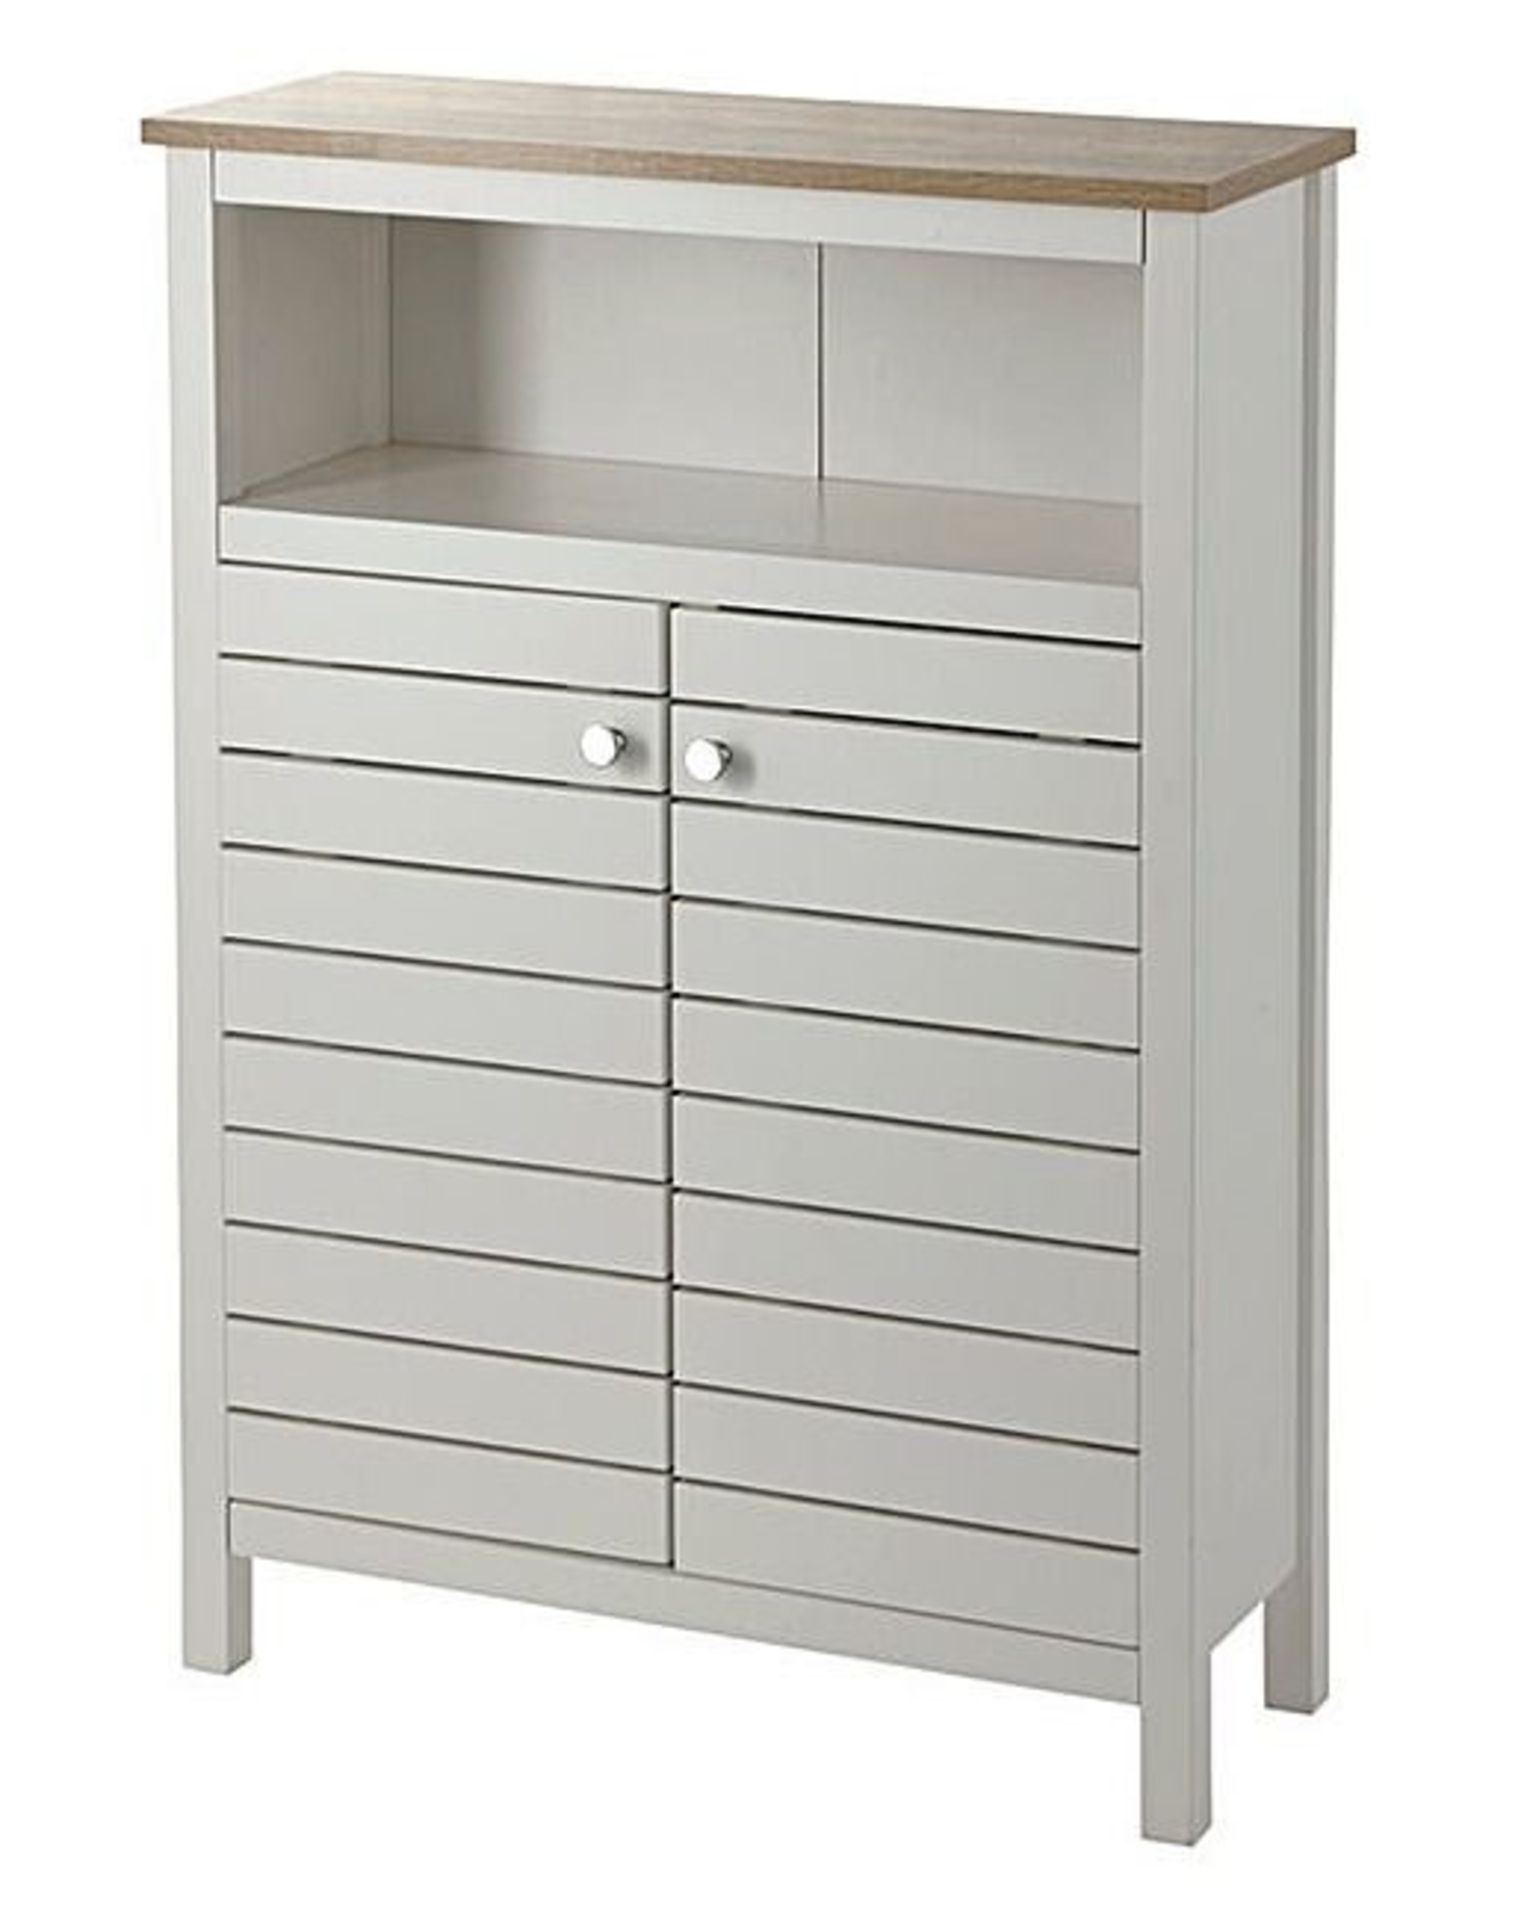 1 BOXED WHITEHAVEN WIDE CONSOLE UNIT WITH 2 DOORS IN OFF WHITE AND OAK / RRP £119.95 (VIEWING HIGHLY